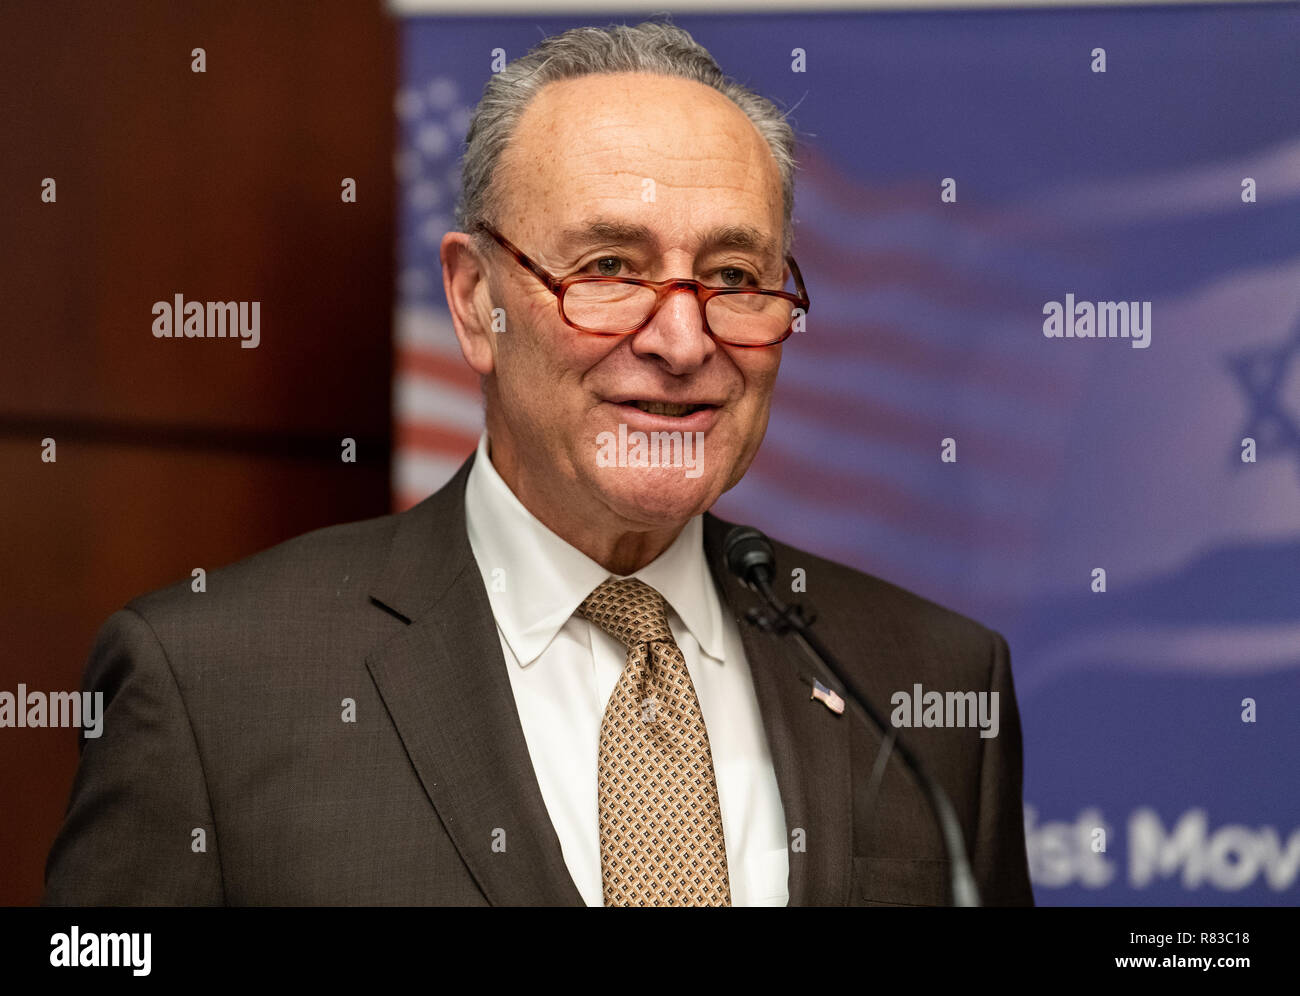 Washington DC, USA. 12th Dec 2018. US Senator Chuck Schumer (Charles Schumer) (D-NY) at the American Zionist Movement / AZM Washington Forum: Renewing the Bipartisan Commitment Standing with Israel and Zionism in the Capitol Visitor Center in Washington, DC on December 12, 2018. Credit: Michael Brochstein/Alamy Live News Stock Photo